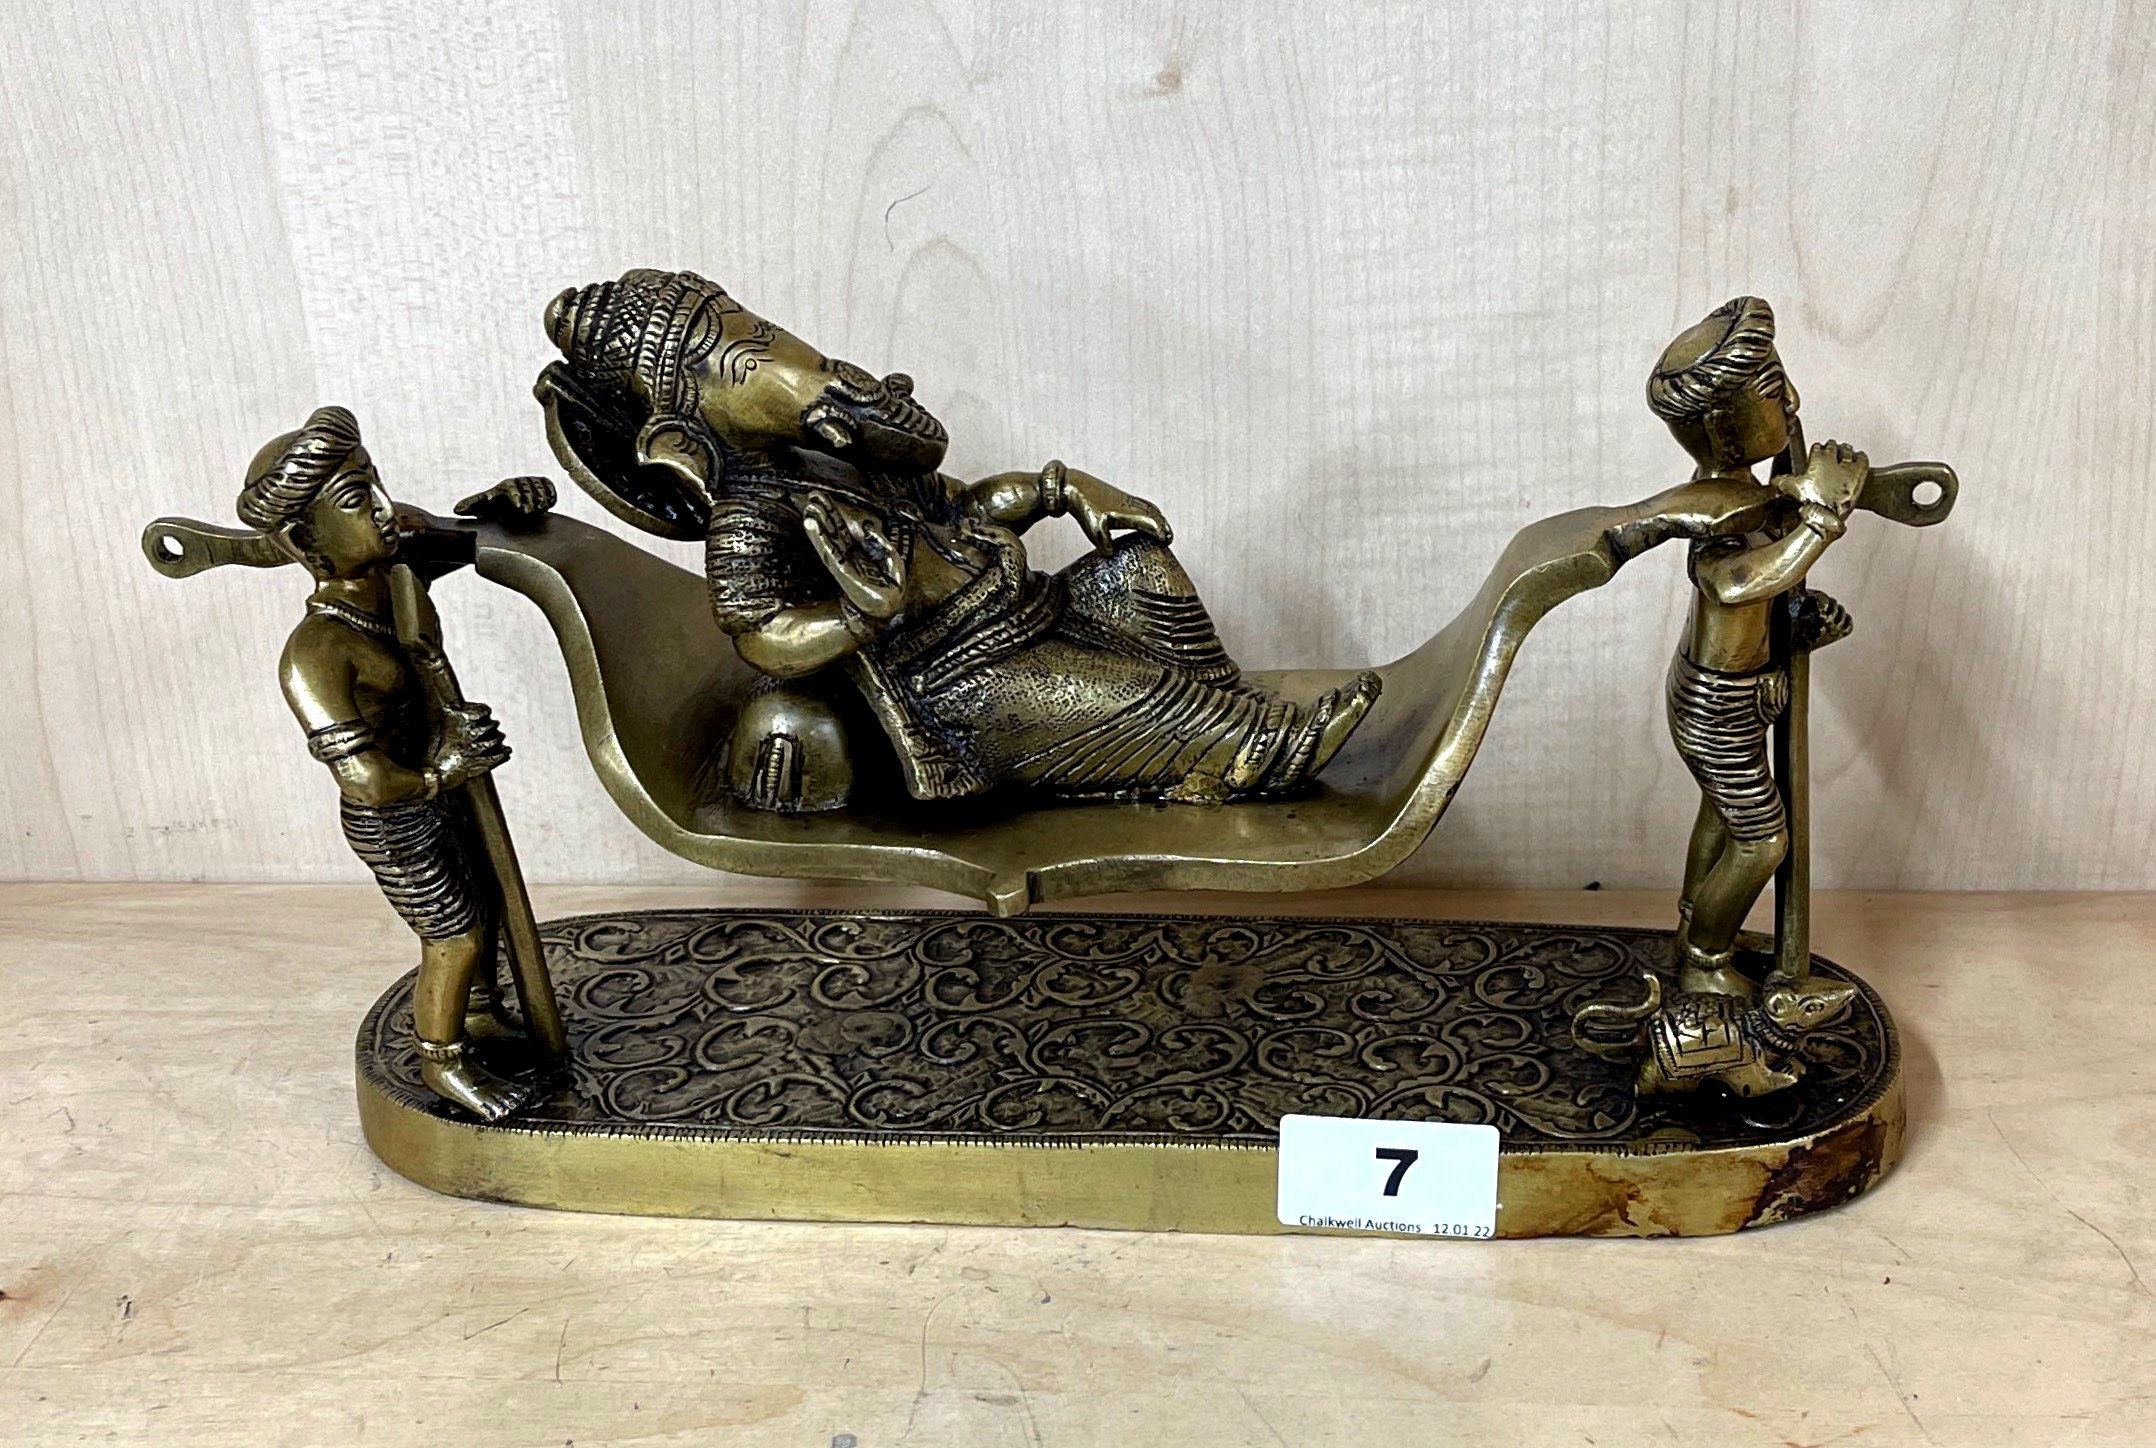 An unusual bronze/brass figure of the elephant god Ganesh being carried on a litter, 32 x 16cm.